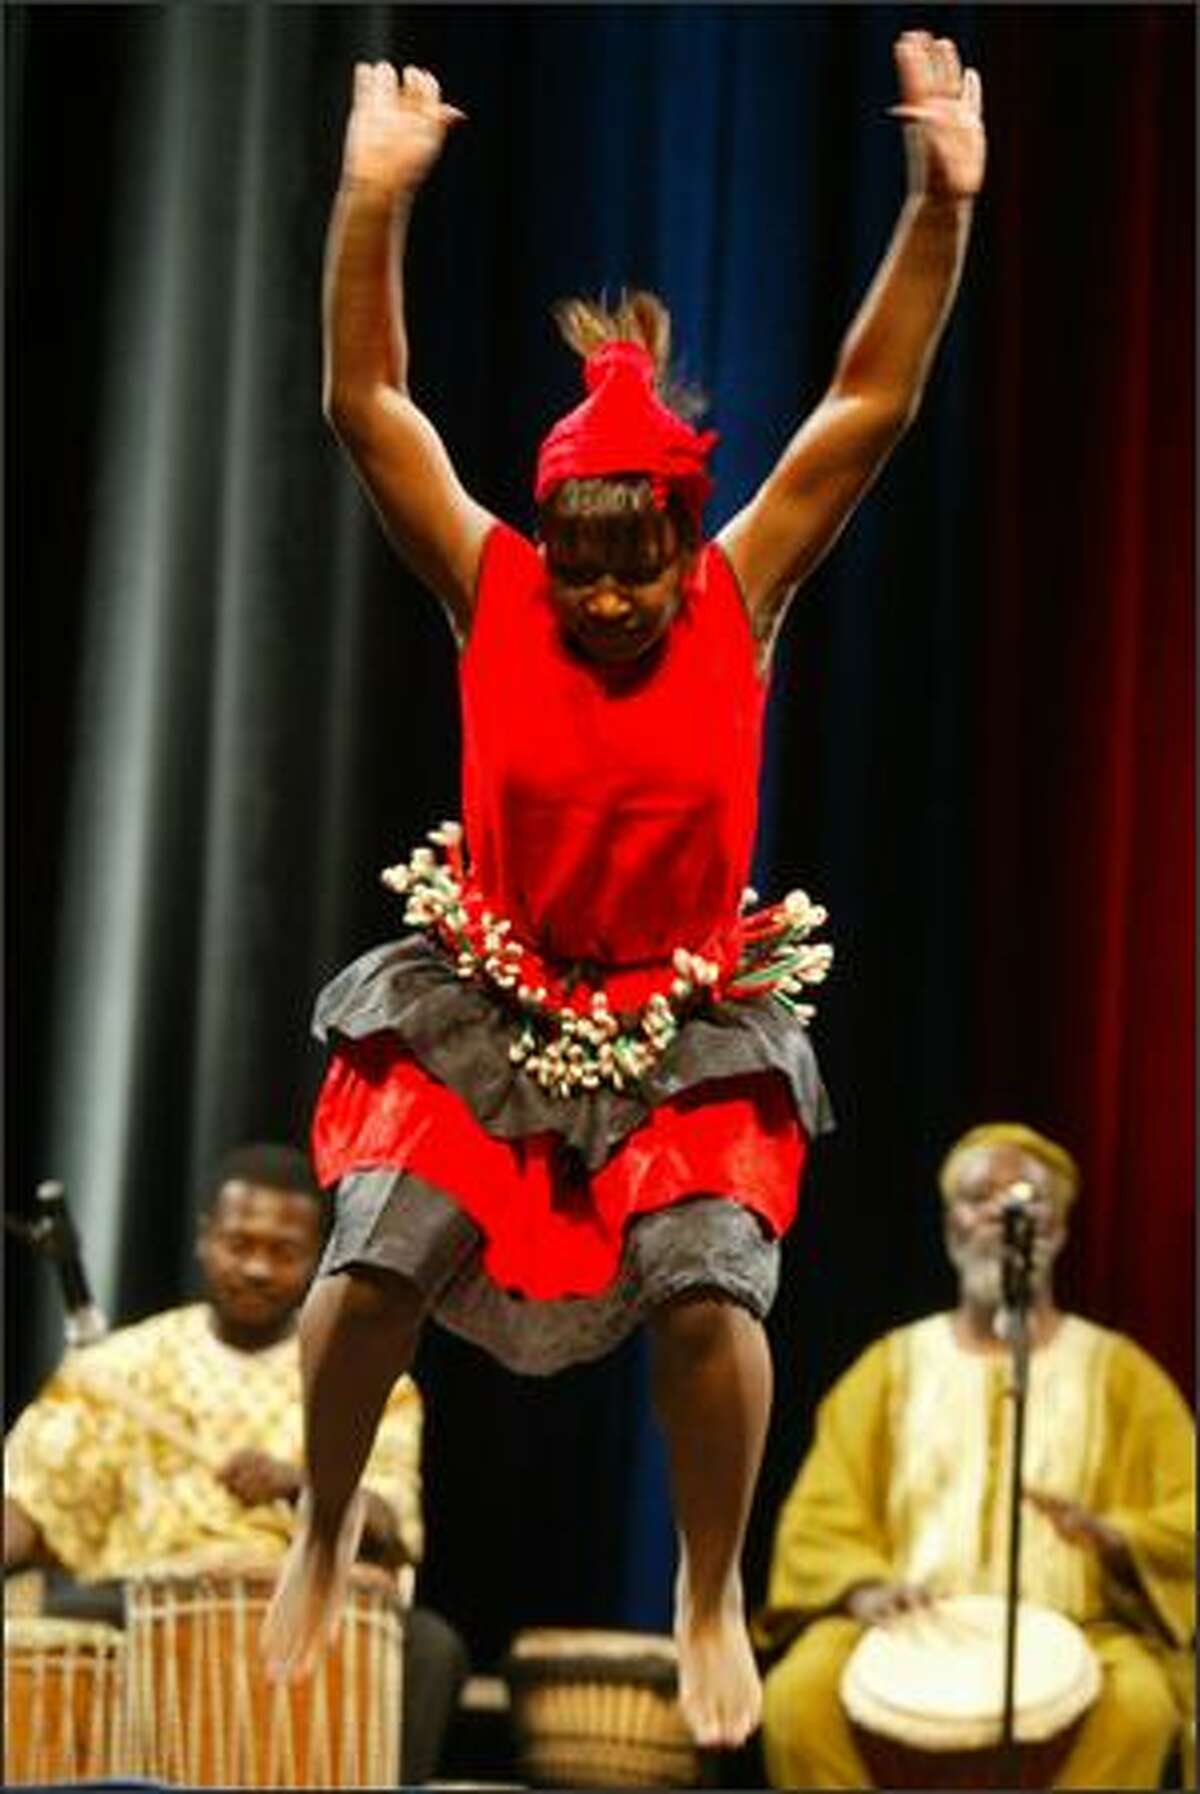 A Seattle African dance group performed before Senator Barack Obama's speech at the WAMU Theater.